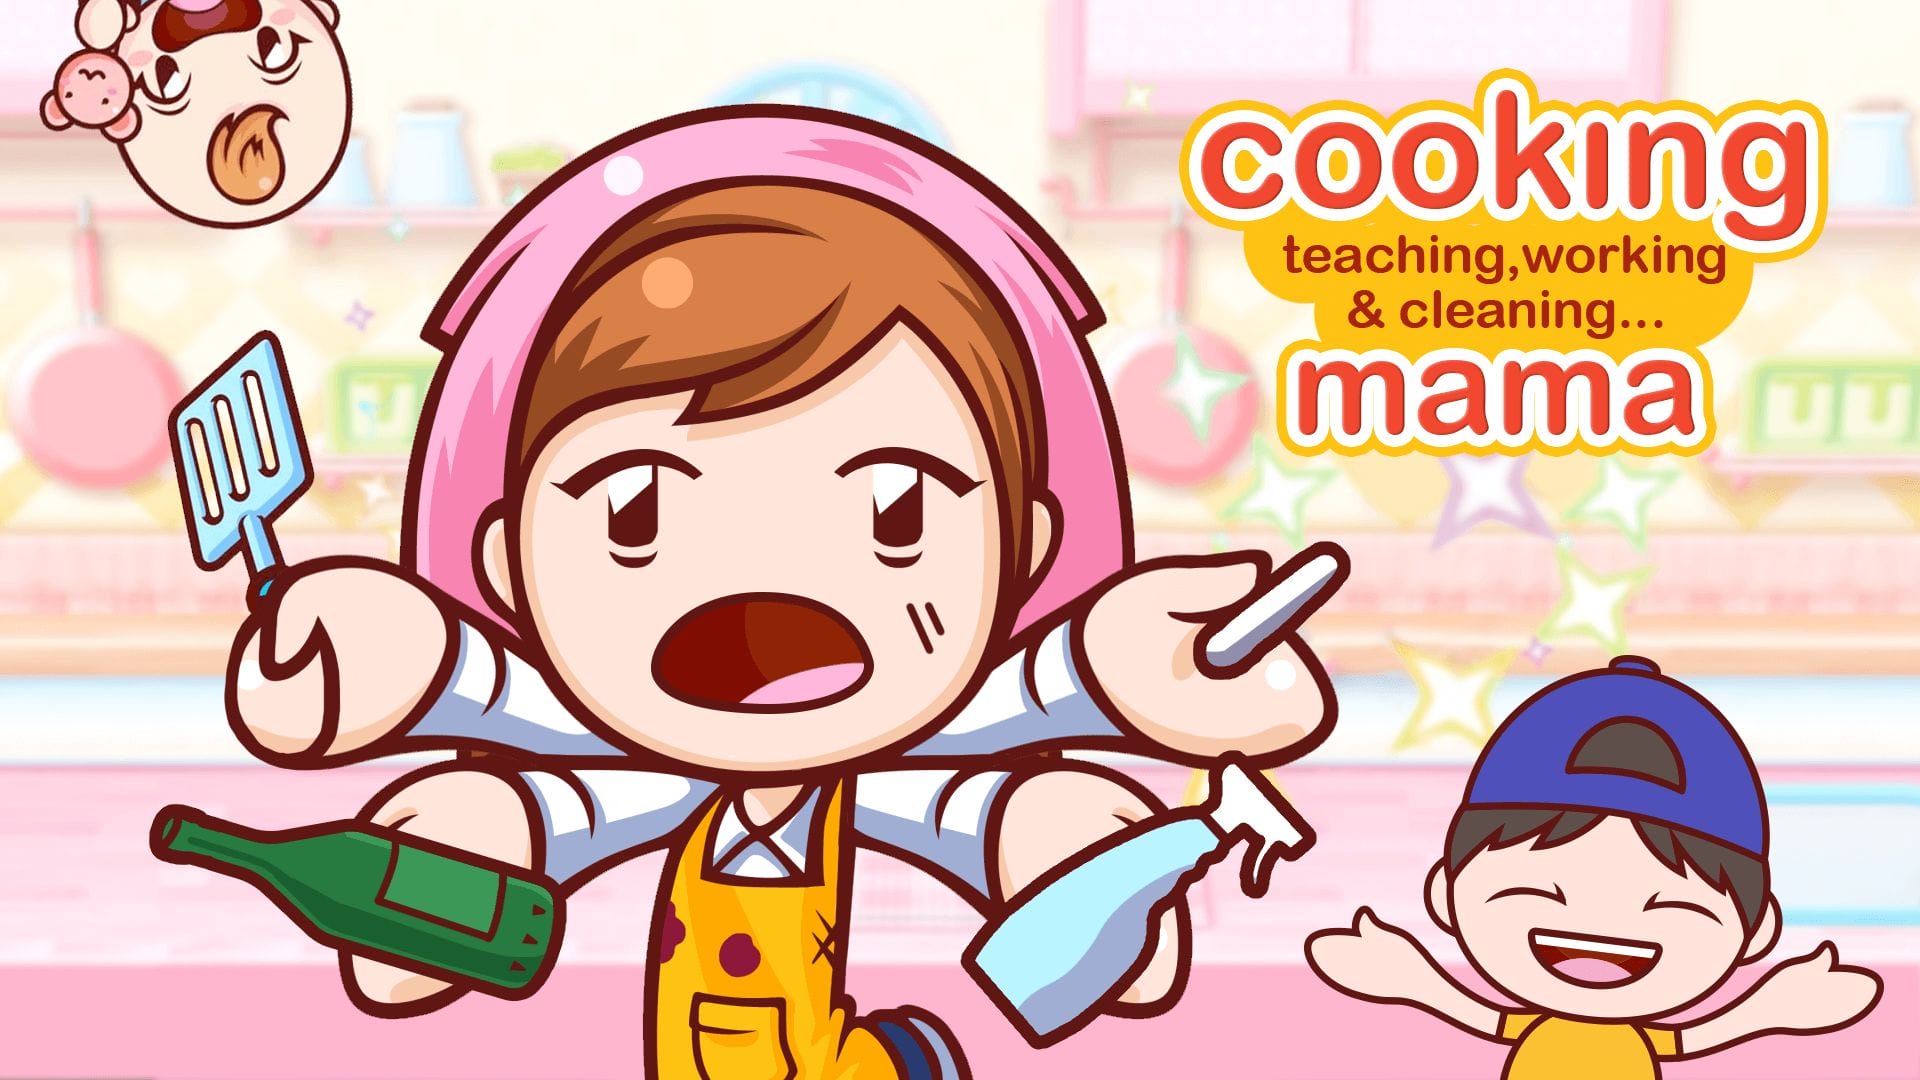 Cooking (teaching, working, and cleaning) Mama